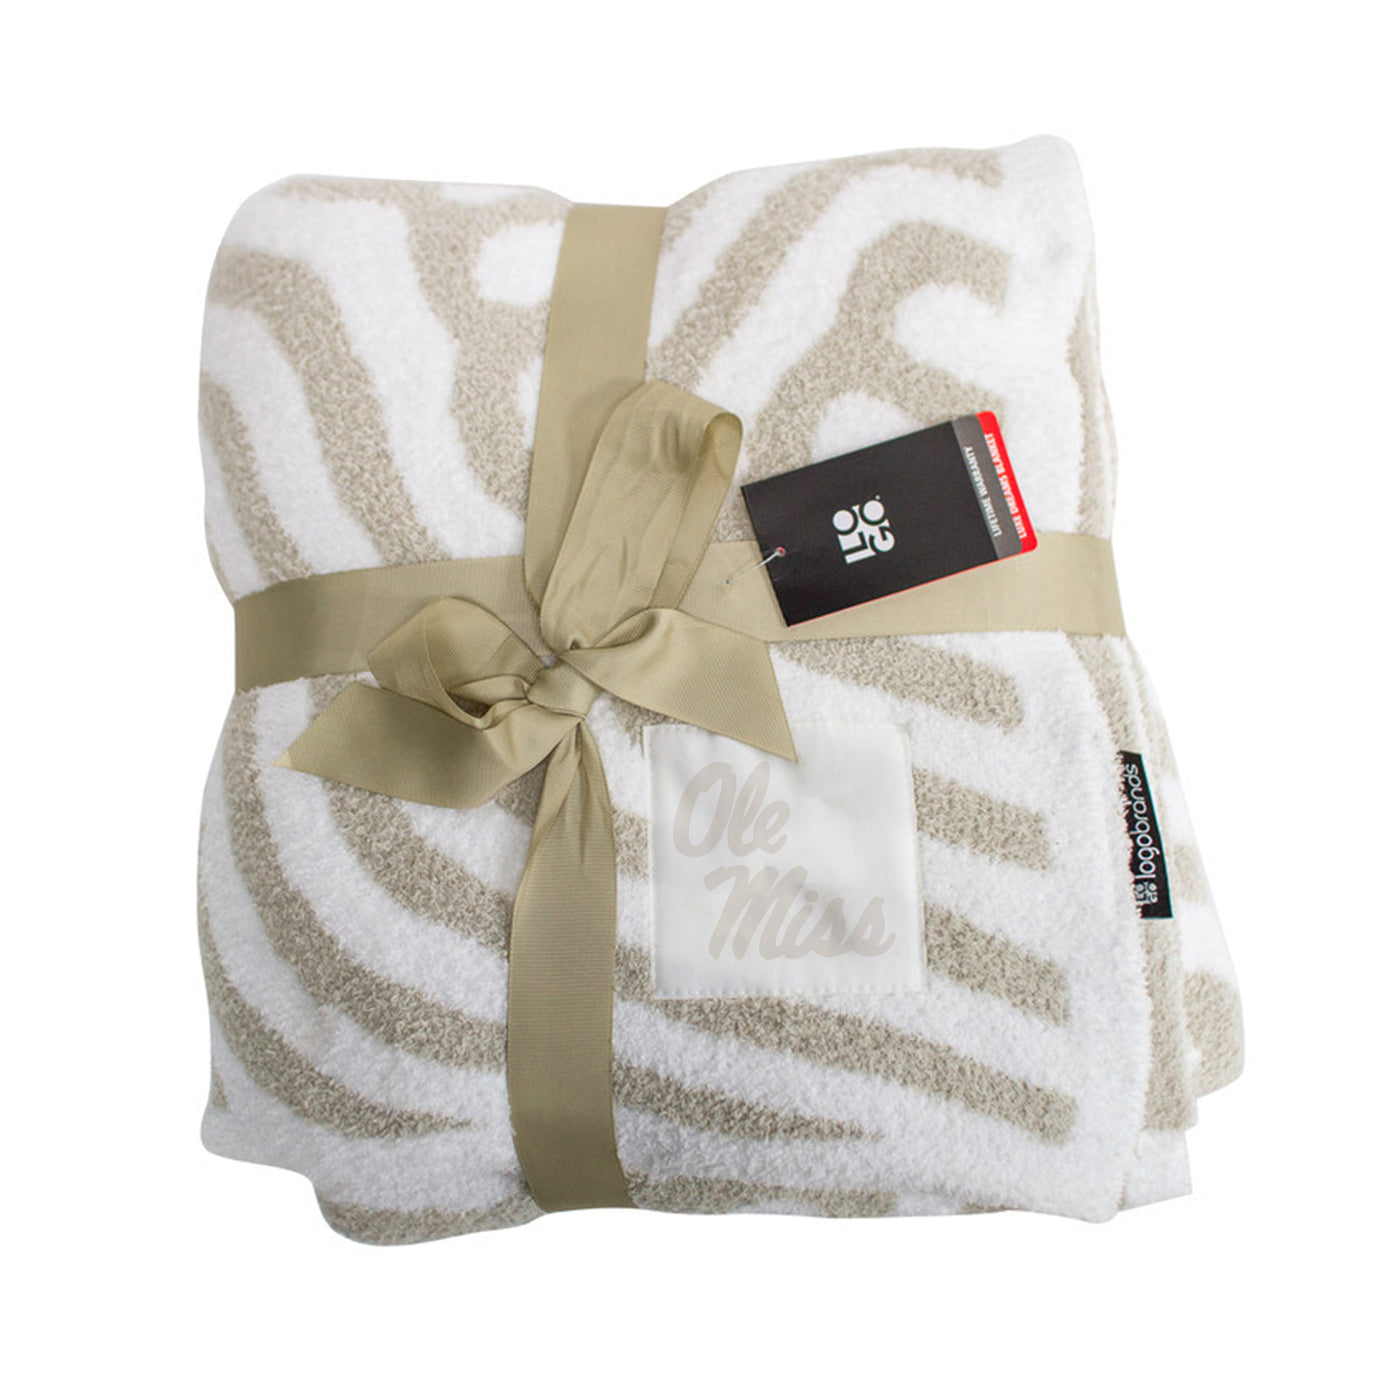 Ole Miss Luxe Dreams Throw